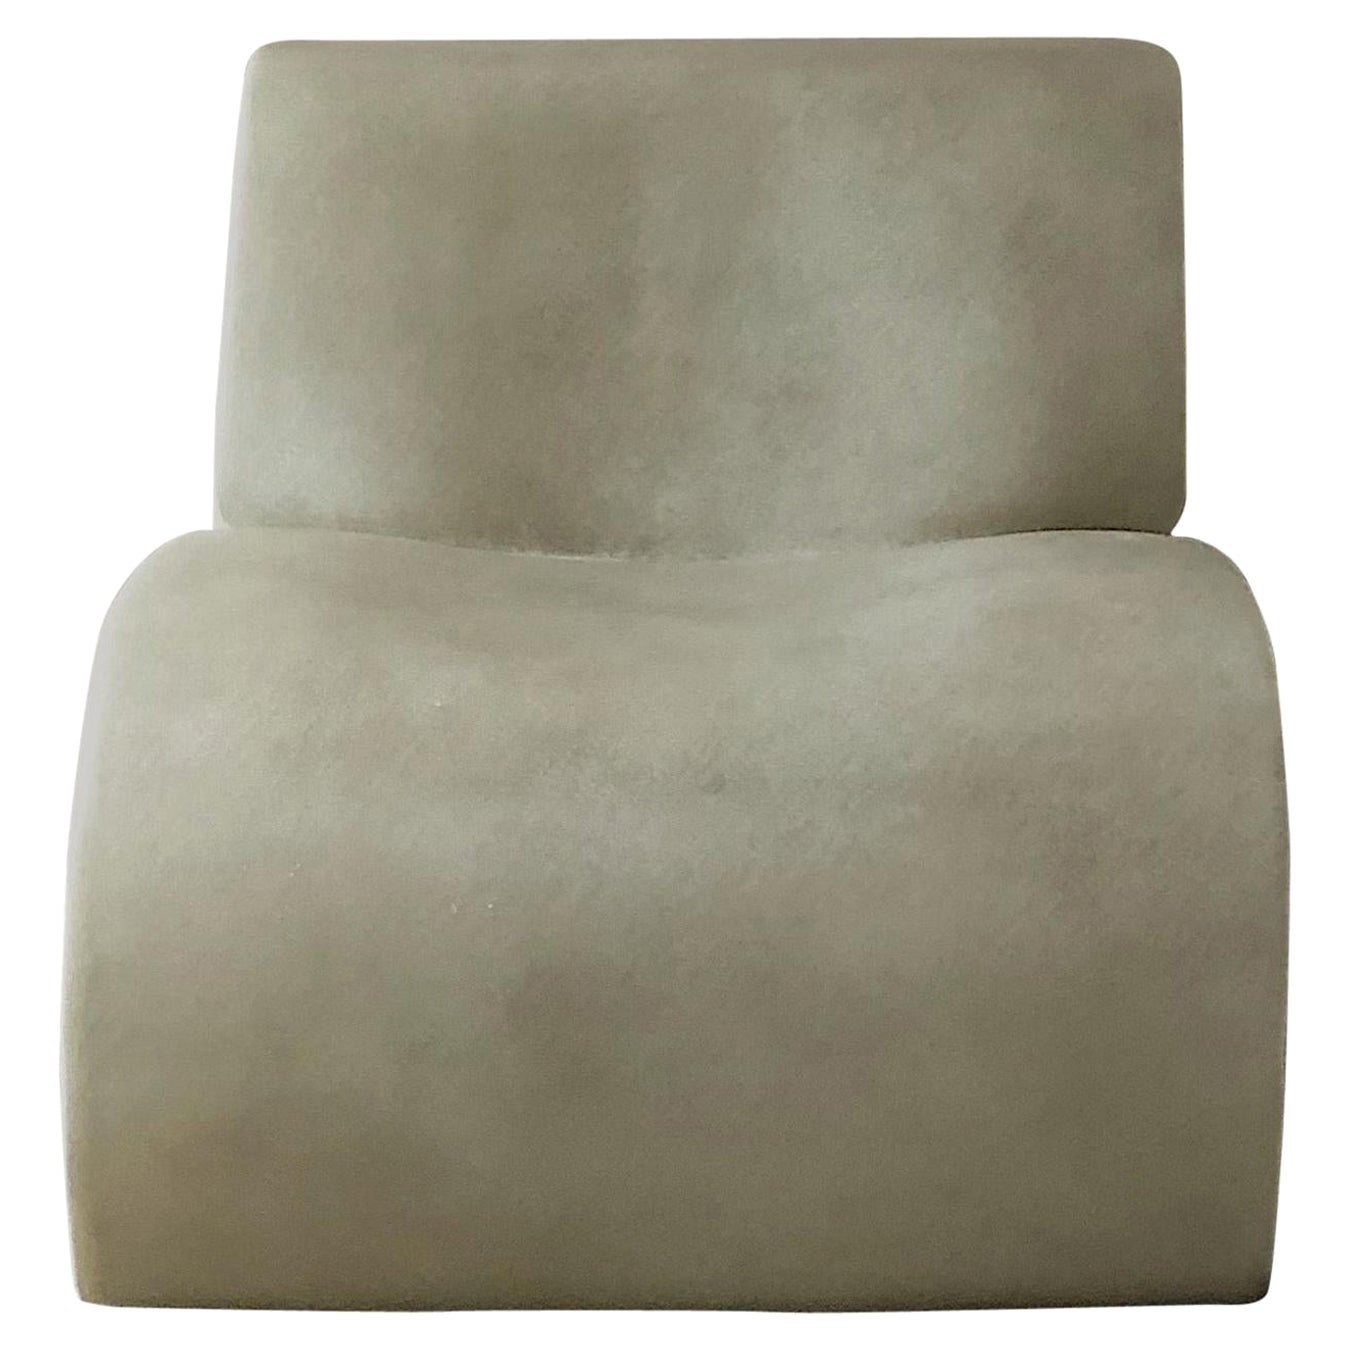 White Curl Up Lounge Chair by kar